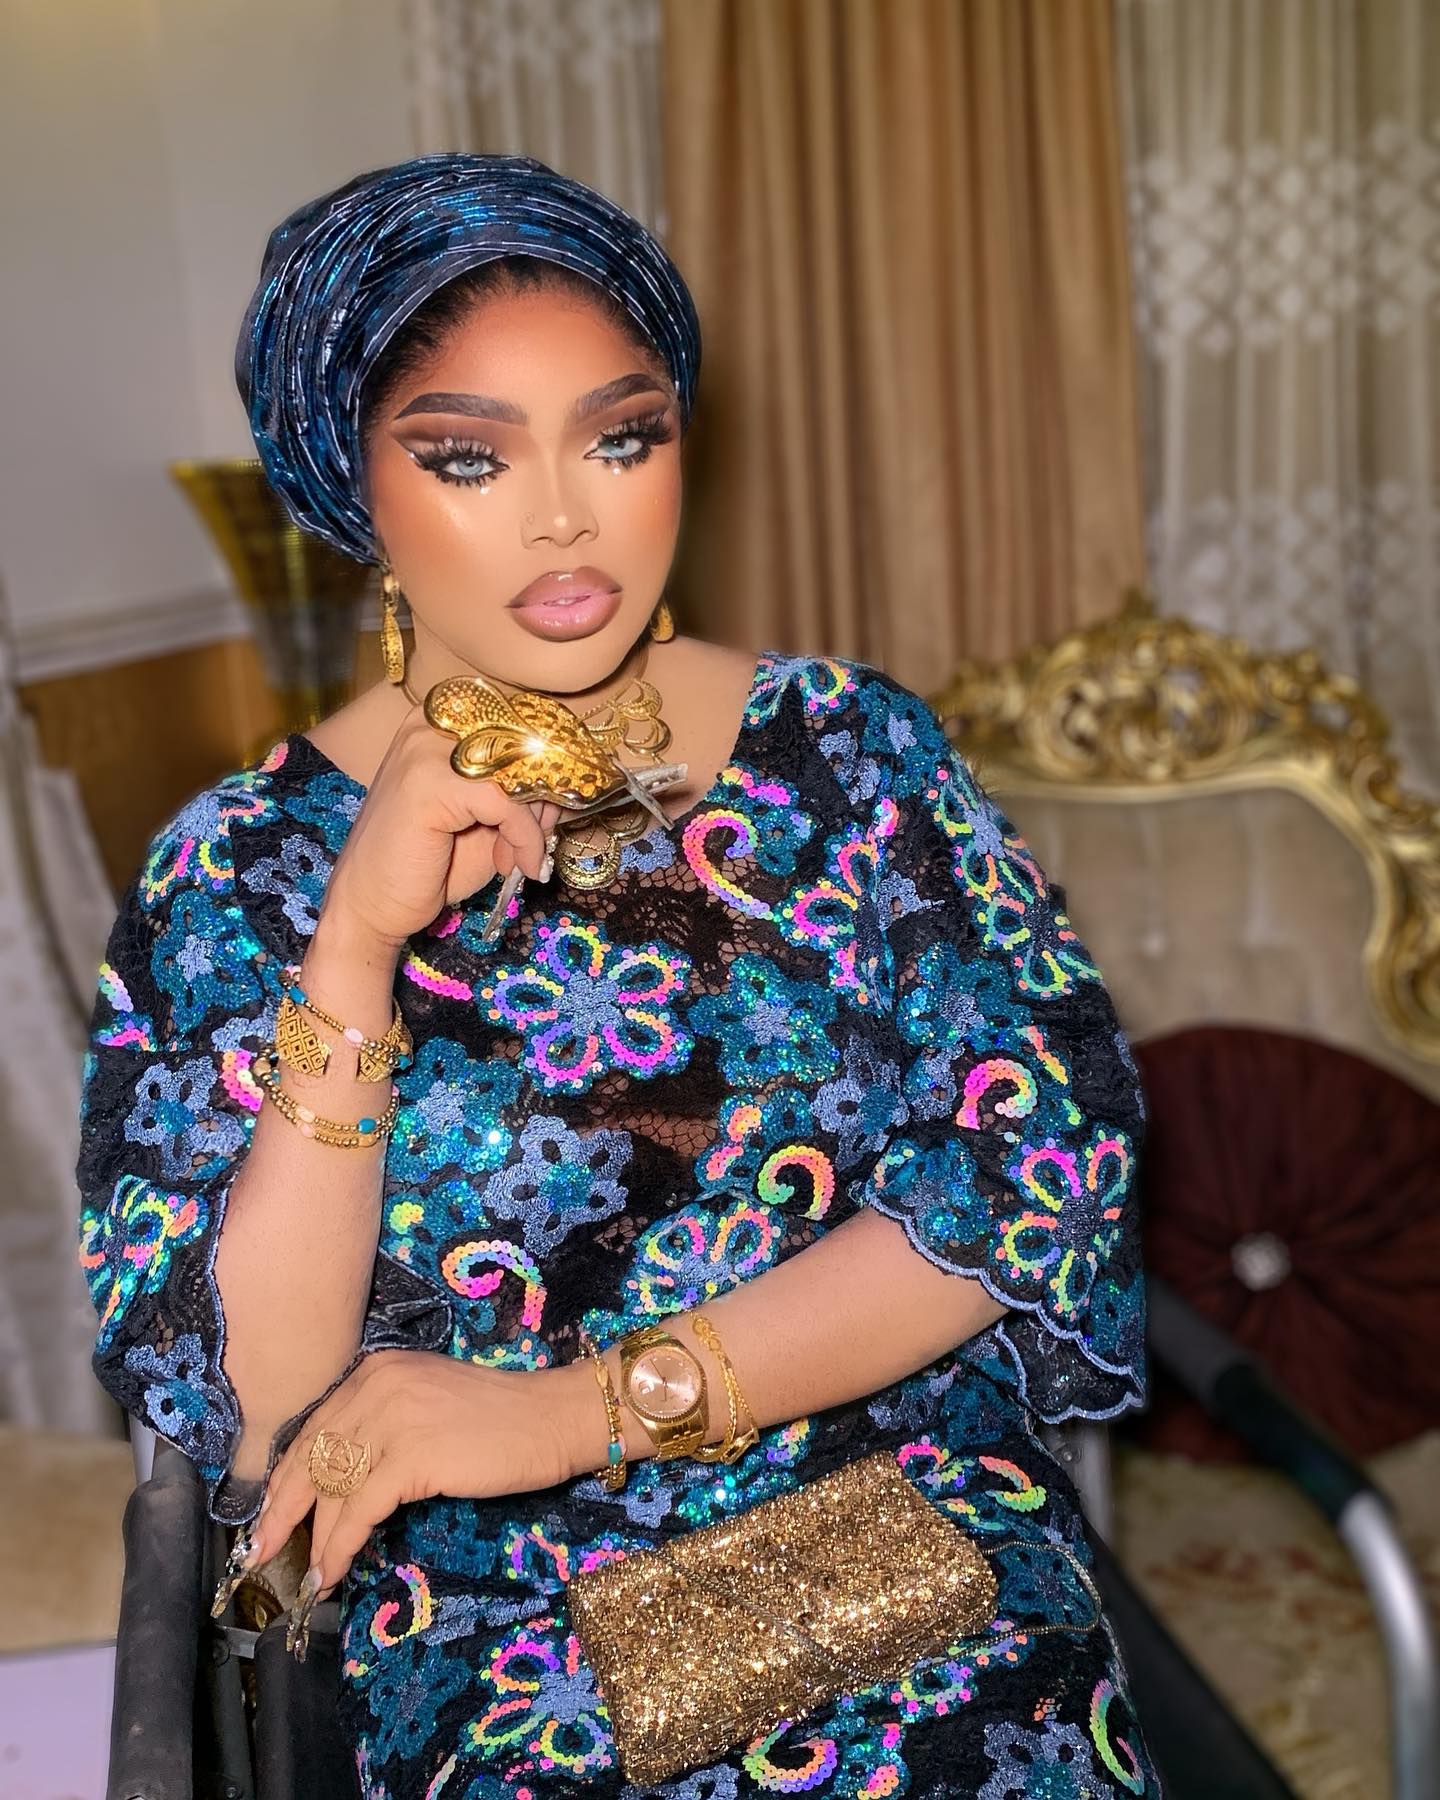 Bobrisky hails his Boyfriends as she shows off wads of cash gifted to him (Video)